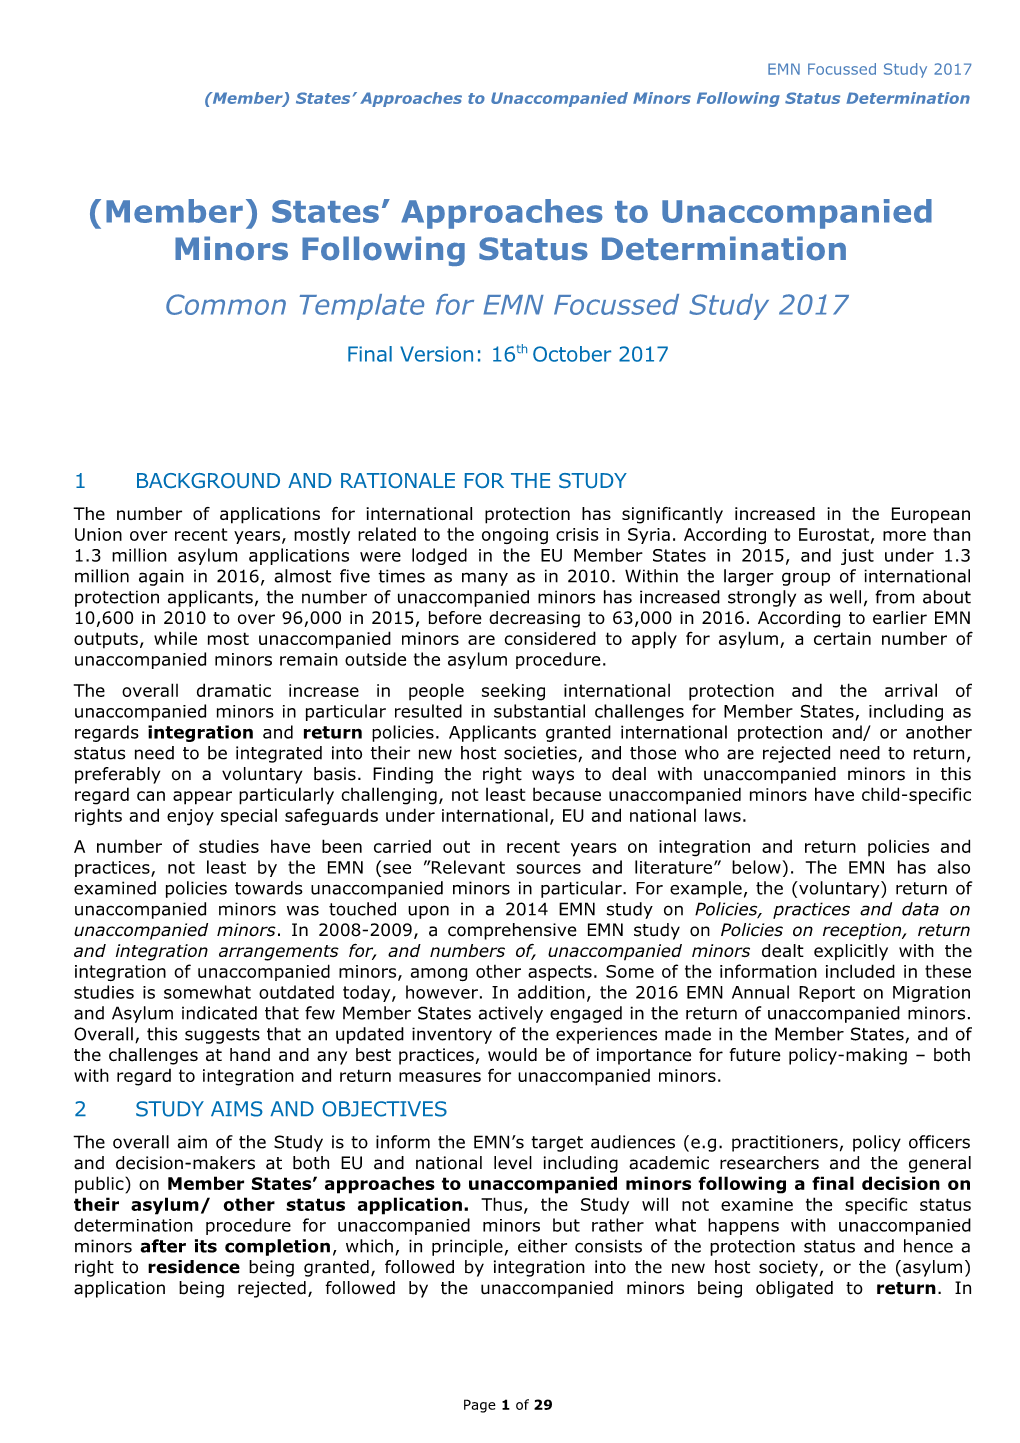 (Member) States Approaches to Unaccompanied Minors Following Status Determination